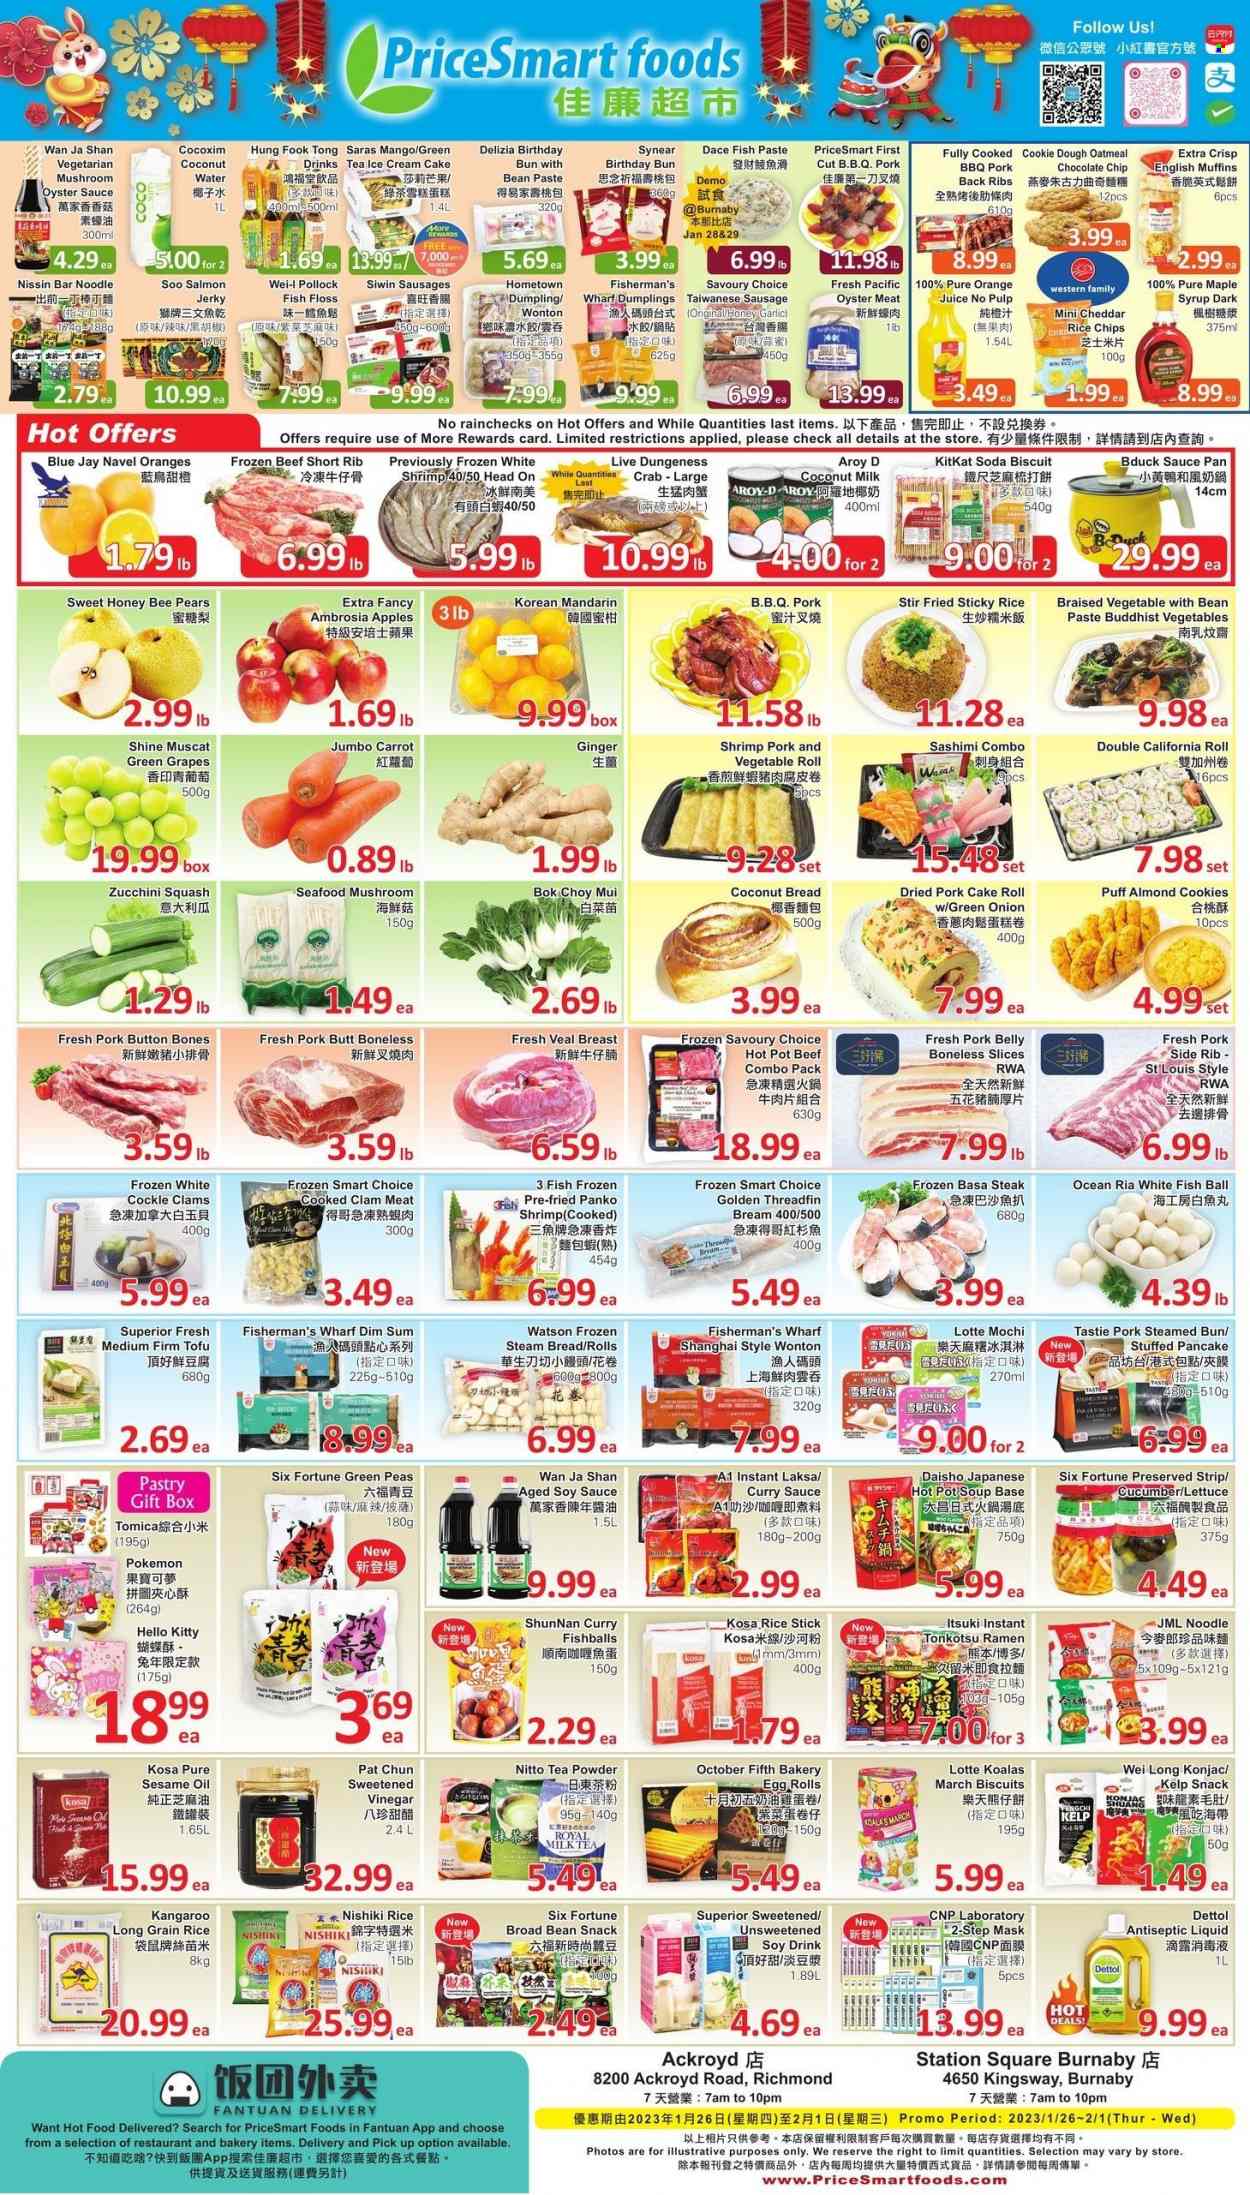 thumbnail - PriceSmart Foods Flyer - January 26, 2023 - February 01, 2023 - Sales products - bread, english muffins, cake, panko breadcrumbs, bok choy, garlic, ginger, zucchini, peas, lettuce, green onion, apples, grapes, mandarines, pears, navel oranges, clams, salmon, whitefish, pollock, oysters, seafood, crab, shrimps, ramen, pizza, steamed bun, soup, egg rolls, pancakes, dumplings, noodles, Nissin, jerky, sausage, tofu, ice cream, cookie dough, cookies, snack, KitKat, oatmeal, coconut milk, long grain rice, soy sauce, oyster sauce, curry sauce, sesame oil, maple syrup, syrup, orange juice, juice, soda, tea, ribs, pork belly, pork meat, pork ribs, pork back ribs, antiseptic liquid, gift box, pot, pan, saucepan, Pokémon, pin, Hello Kitty, steak, Dettol. Page 1.